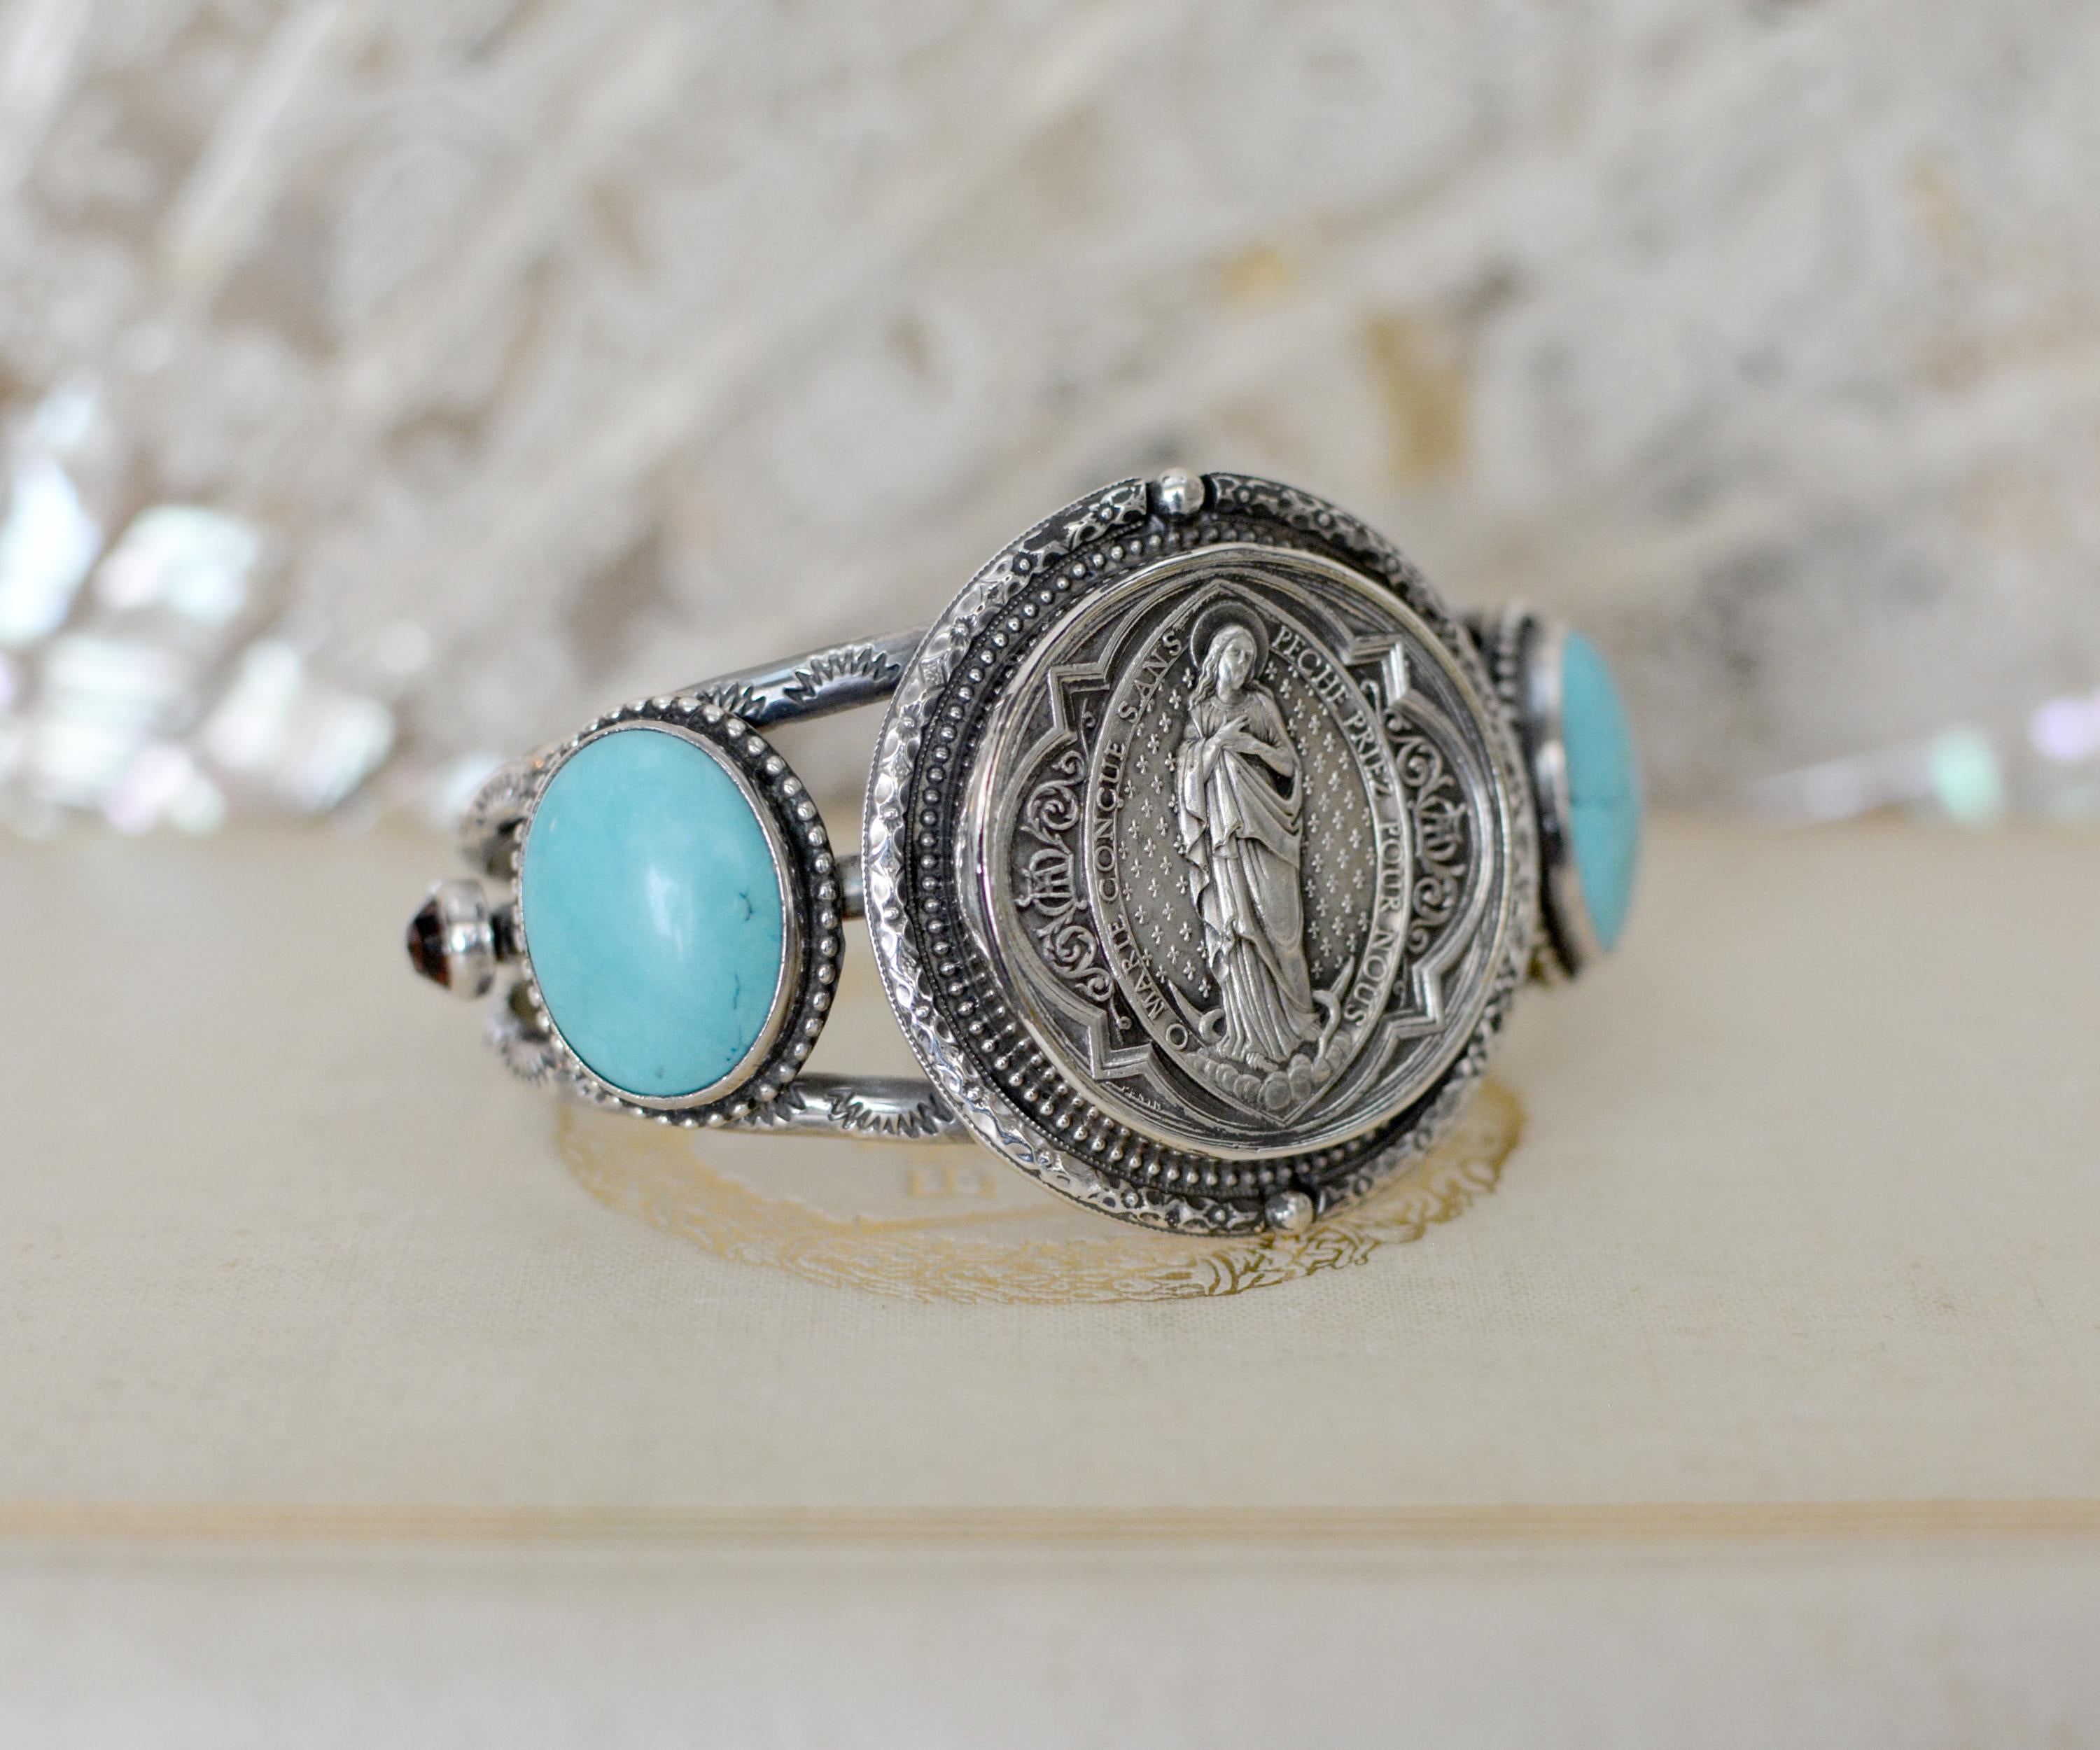 Baroque Jill Garber Antique French Sacred Heart Medal with Turquoise Cuff Bracelet For Sale